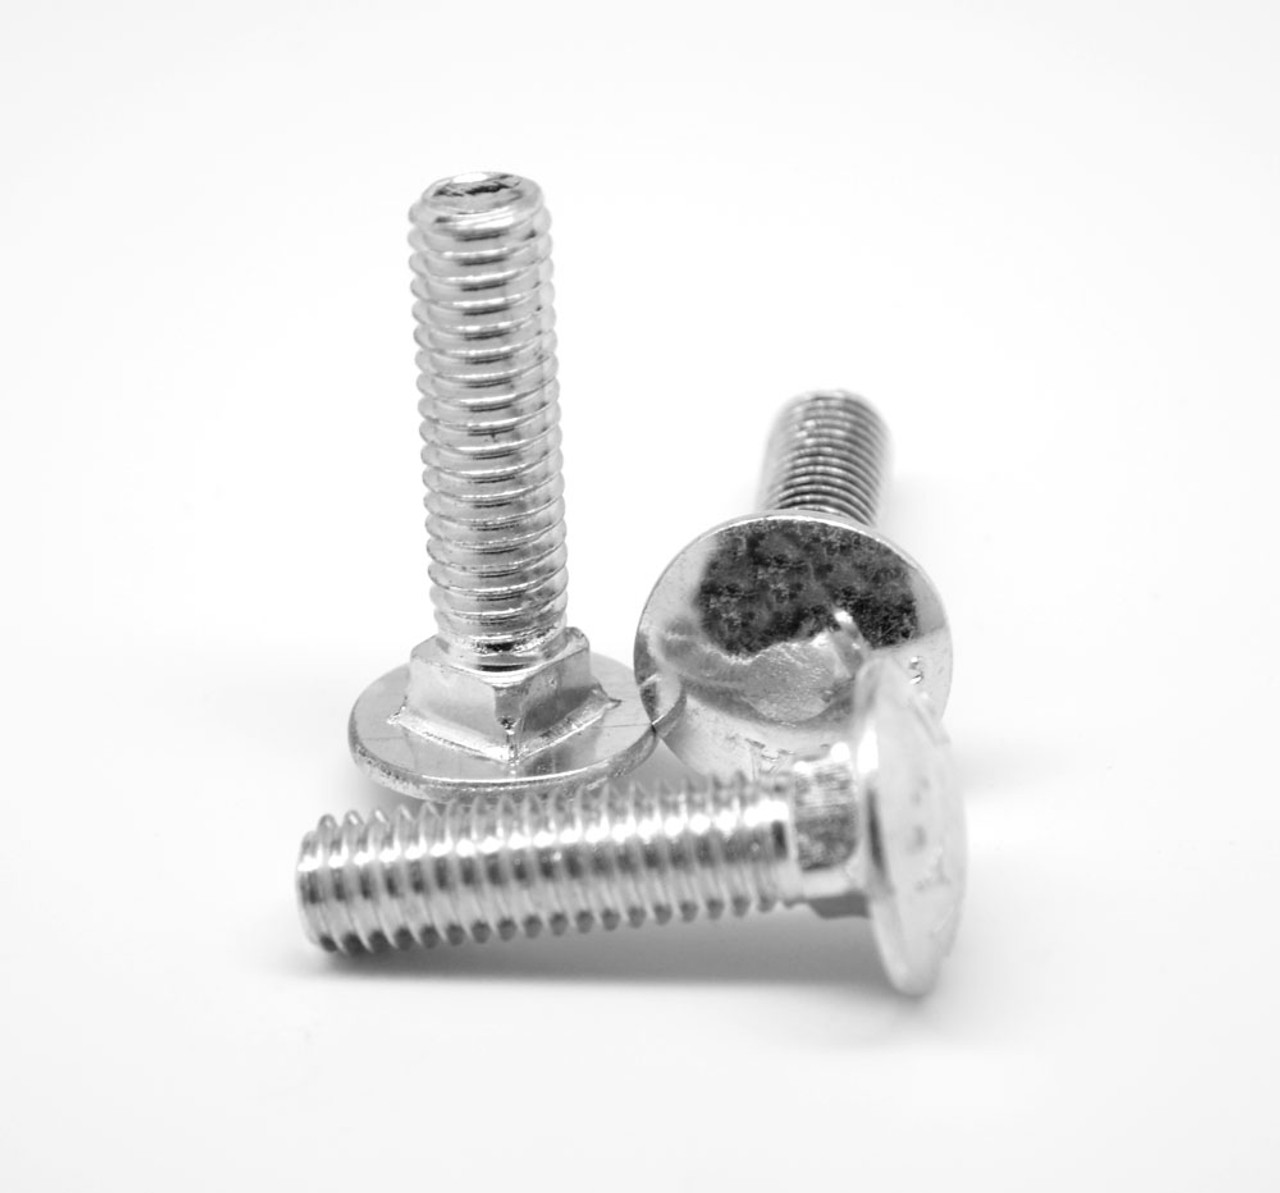 1/4"-20 x 1 1/2" Coarse Thread Carriage Bolt Stainless Steel 18-8